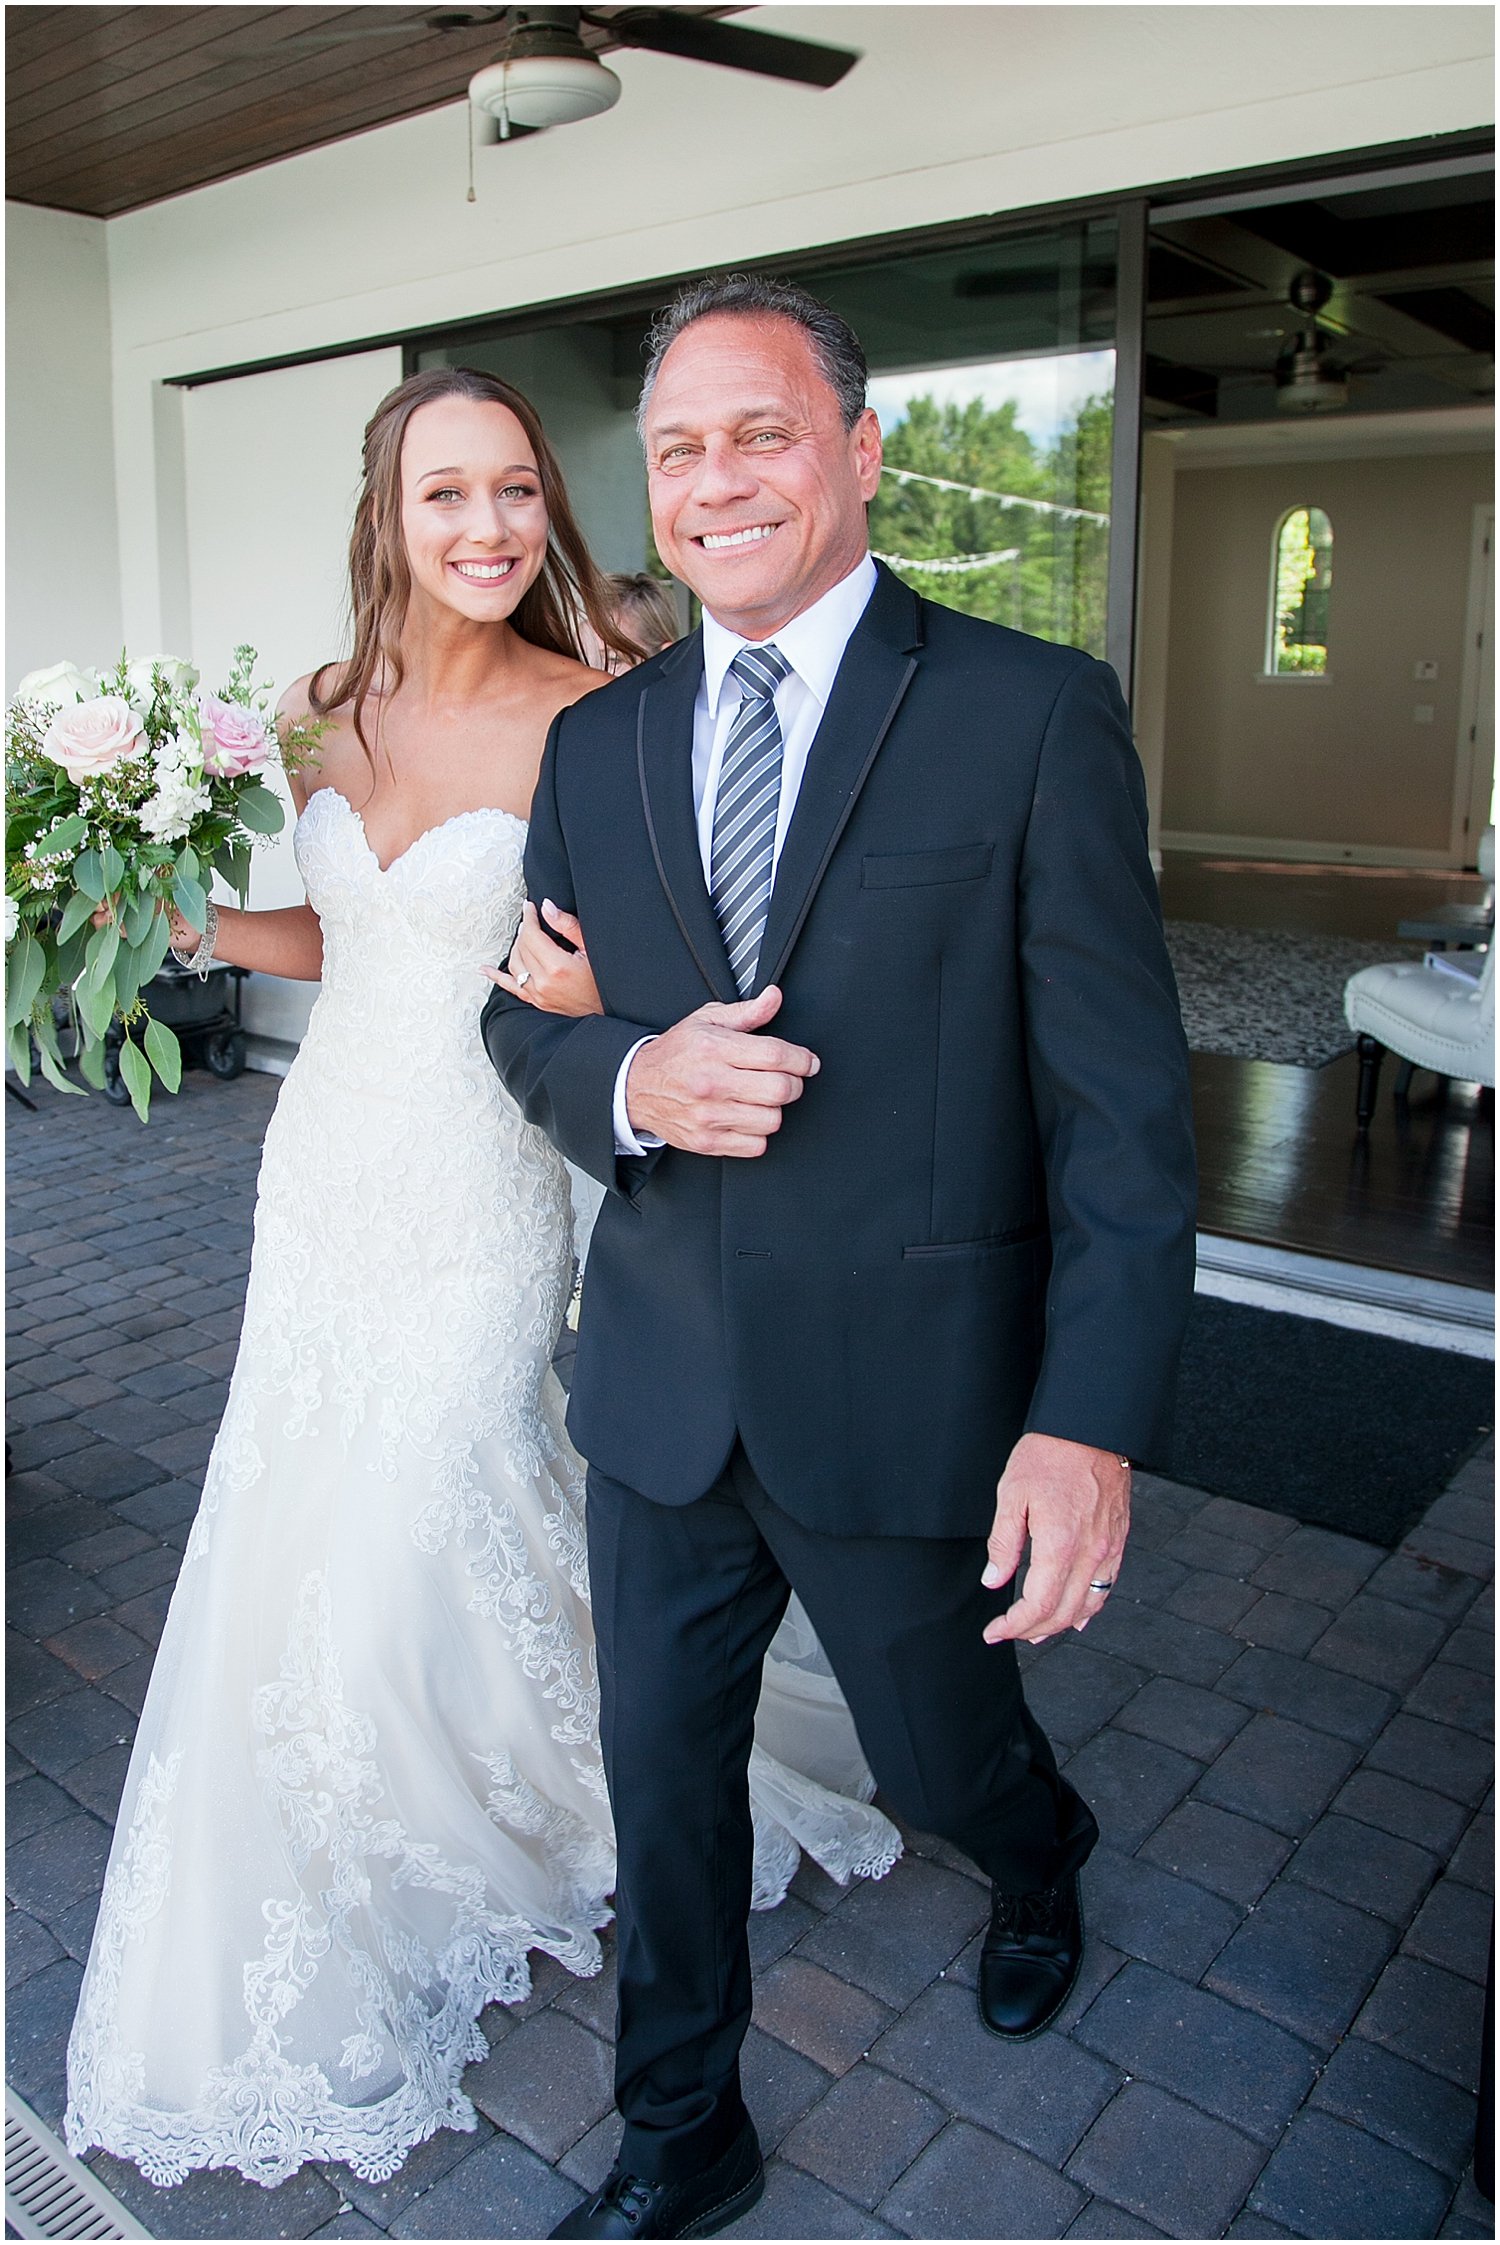 Carrie Wildes Photography - Paradise Springs Wedding_4886.jpg